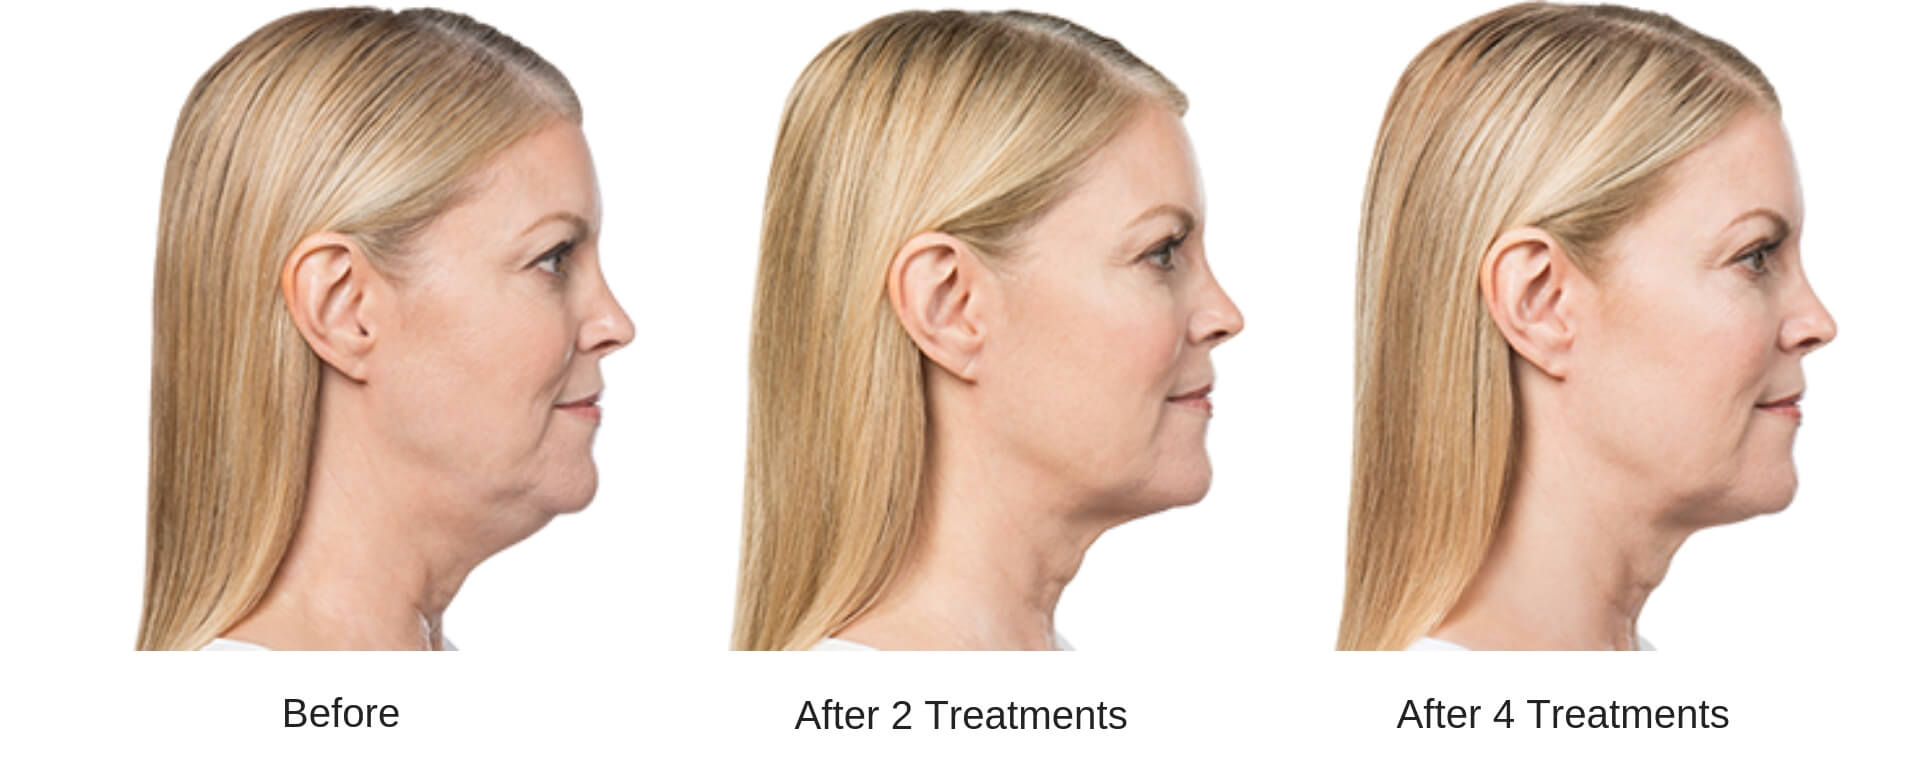 Woman's side profile showing the progression of results of before, after two treatments, and after four treatments of a Kybella series.